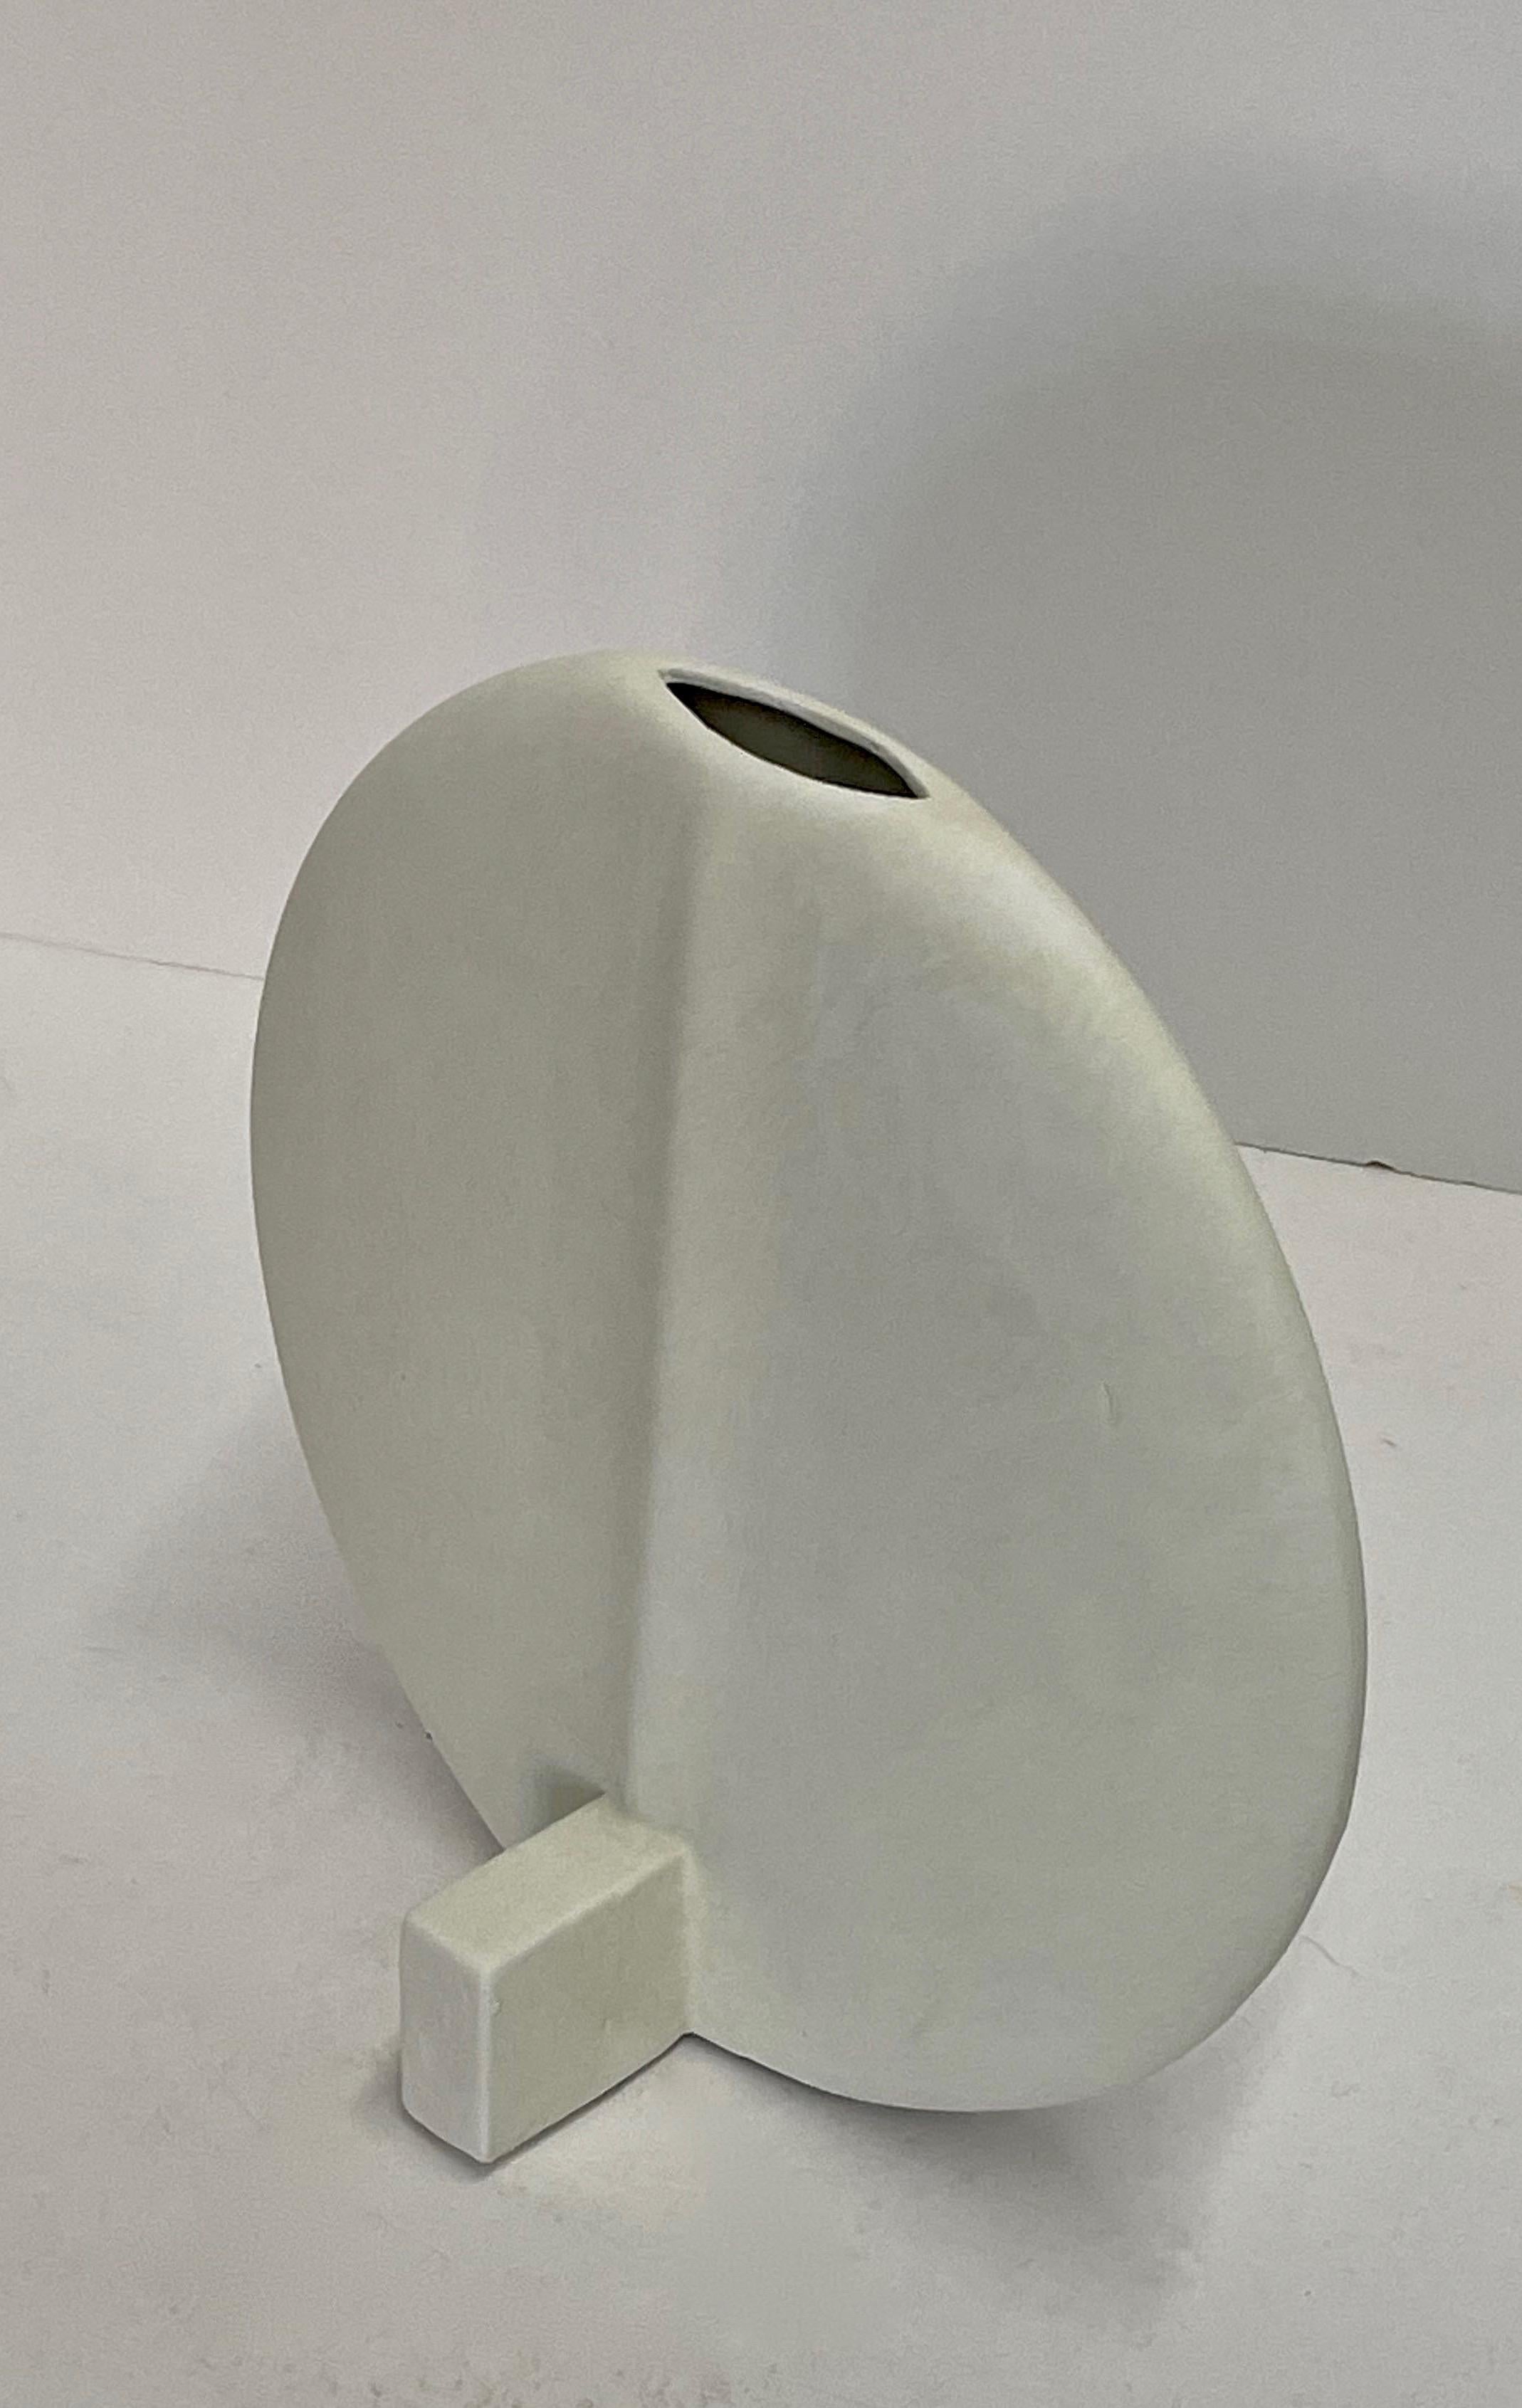 Contemporary Danish design mini sized thin disc shaped white glaze vase.
Center spout.
Sits on self stand.
Available in other sizes in dark grey.